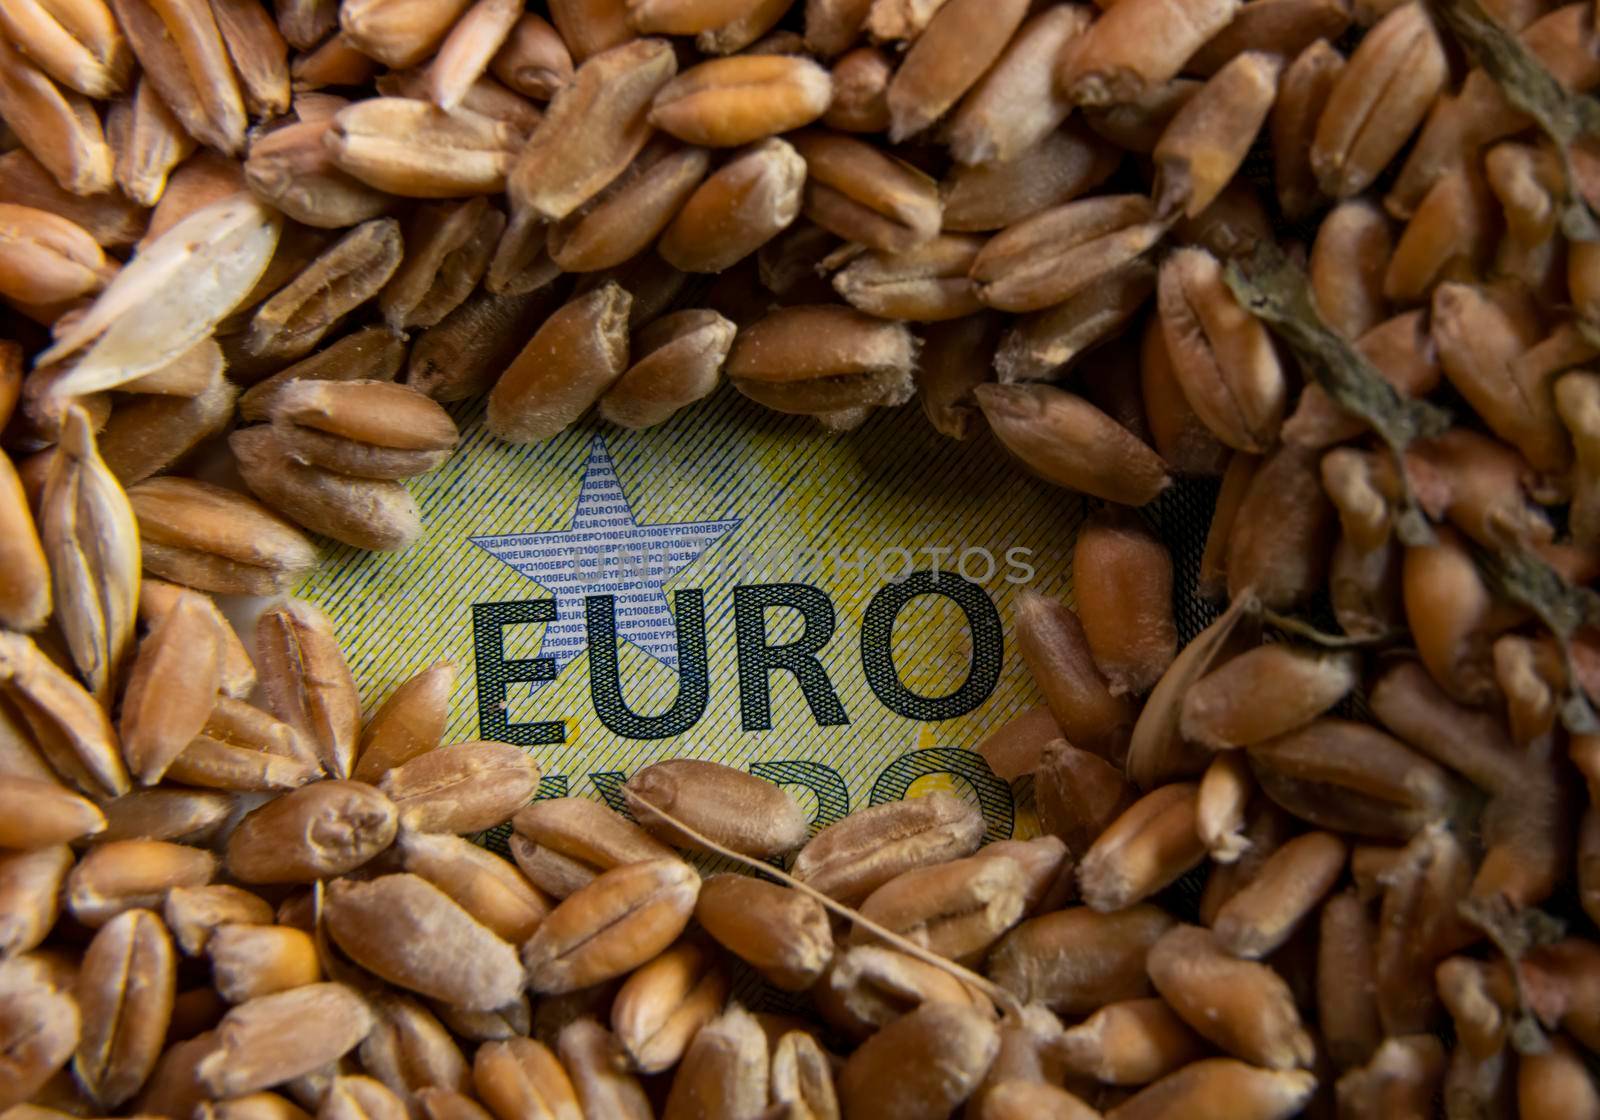 the euro inscription on the banknote which is visible from under the wheat grain close-up